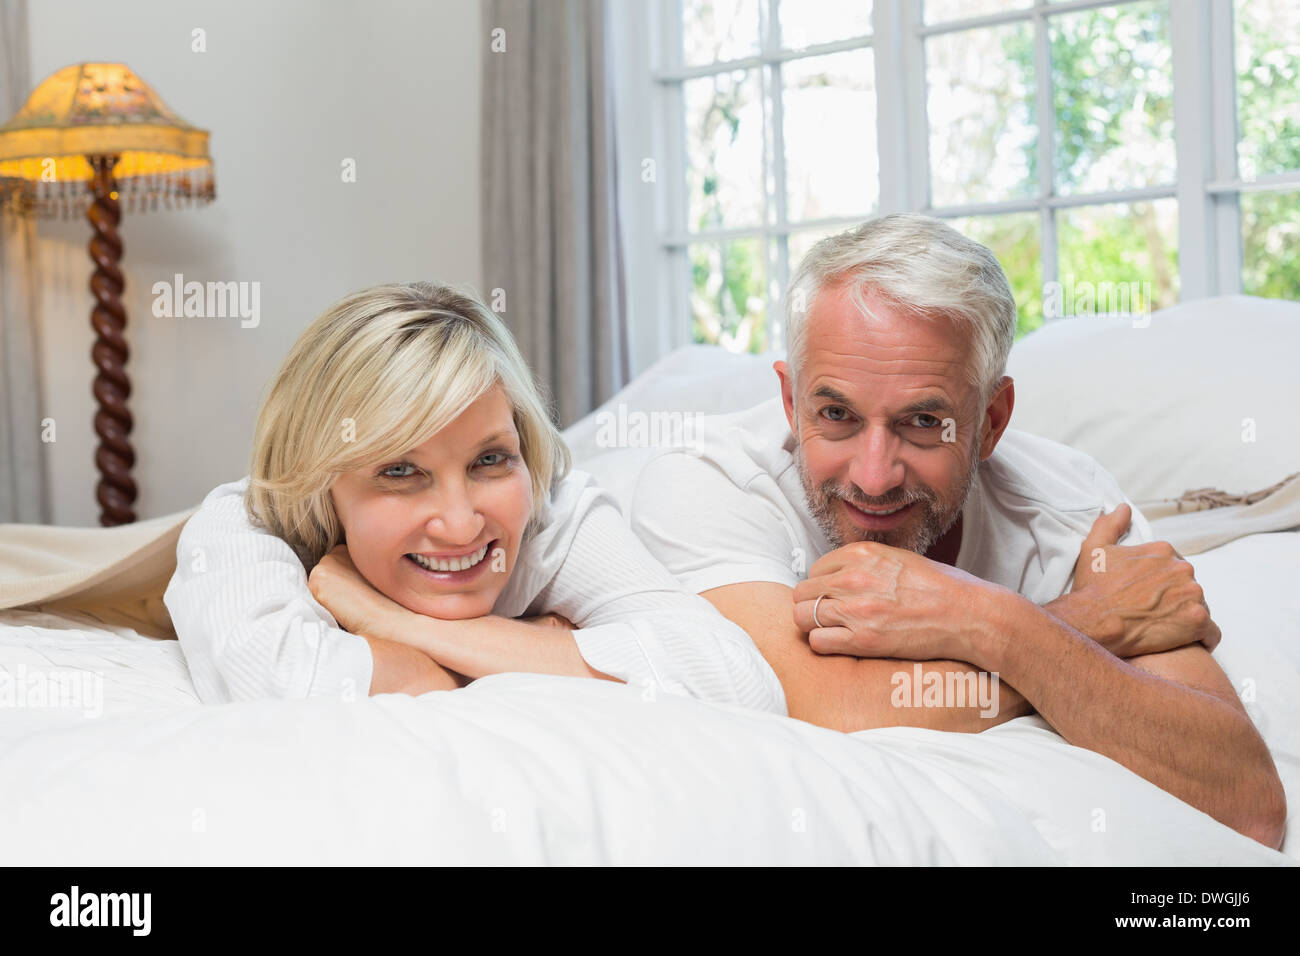 Portrait of a happy mature couple in bed Stock Photo